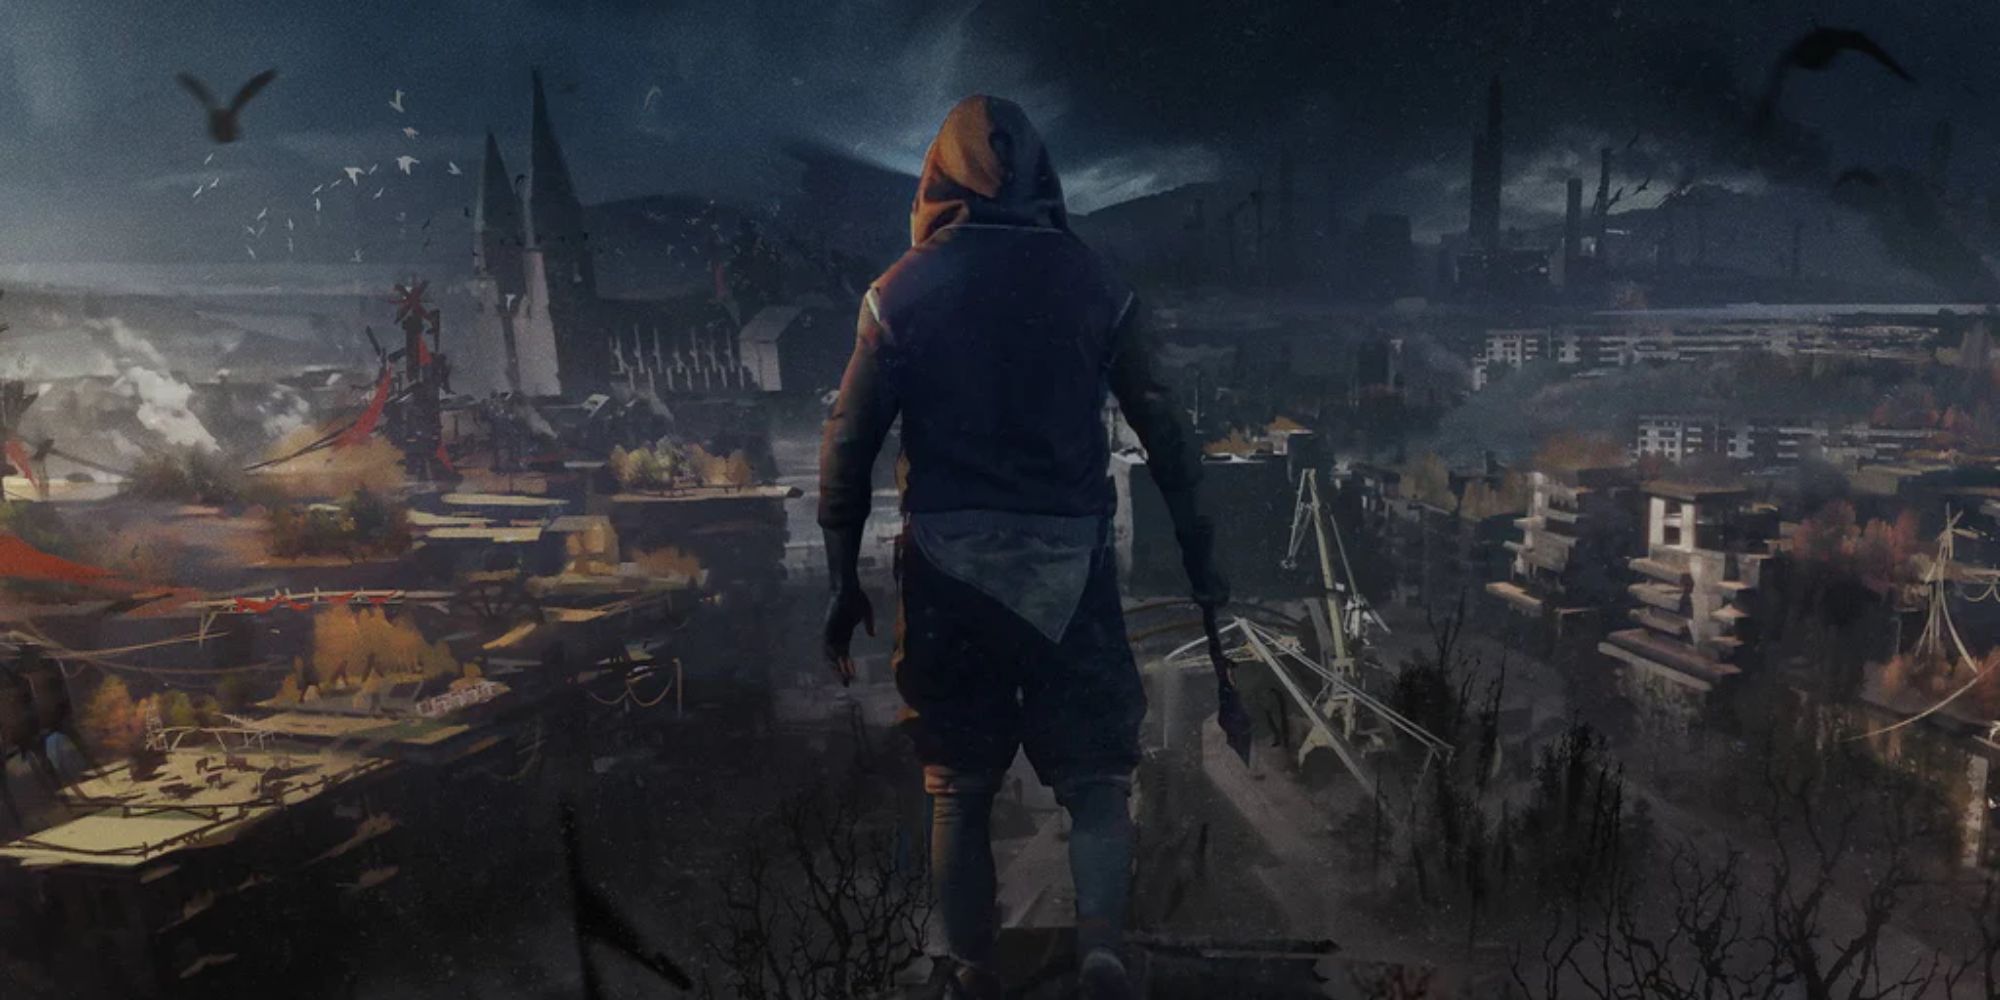 Is Dying Light 2 Cross-Platform and Crossplay? Up-To-Date